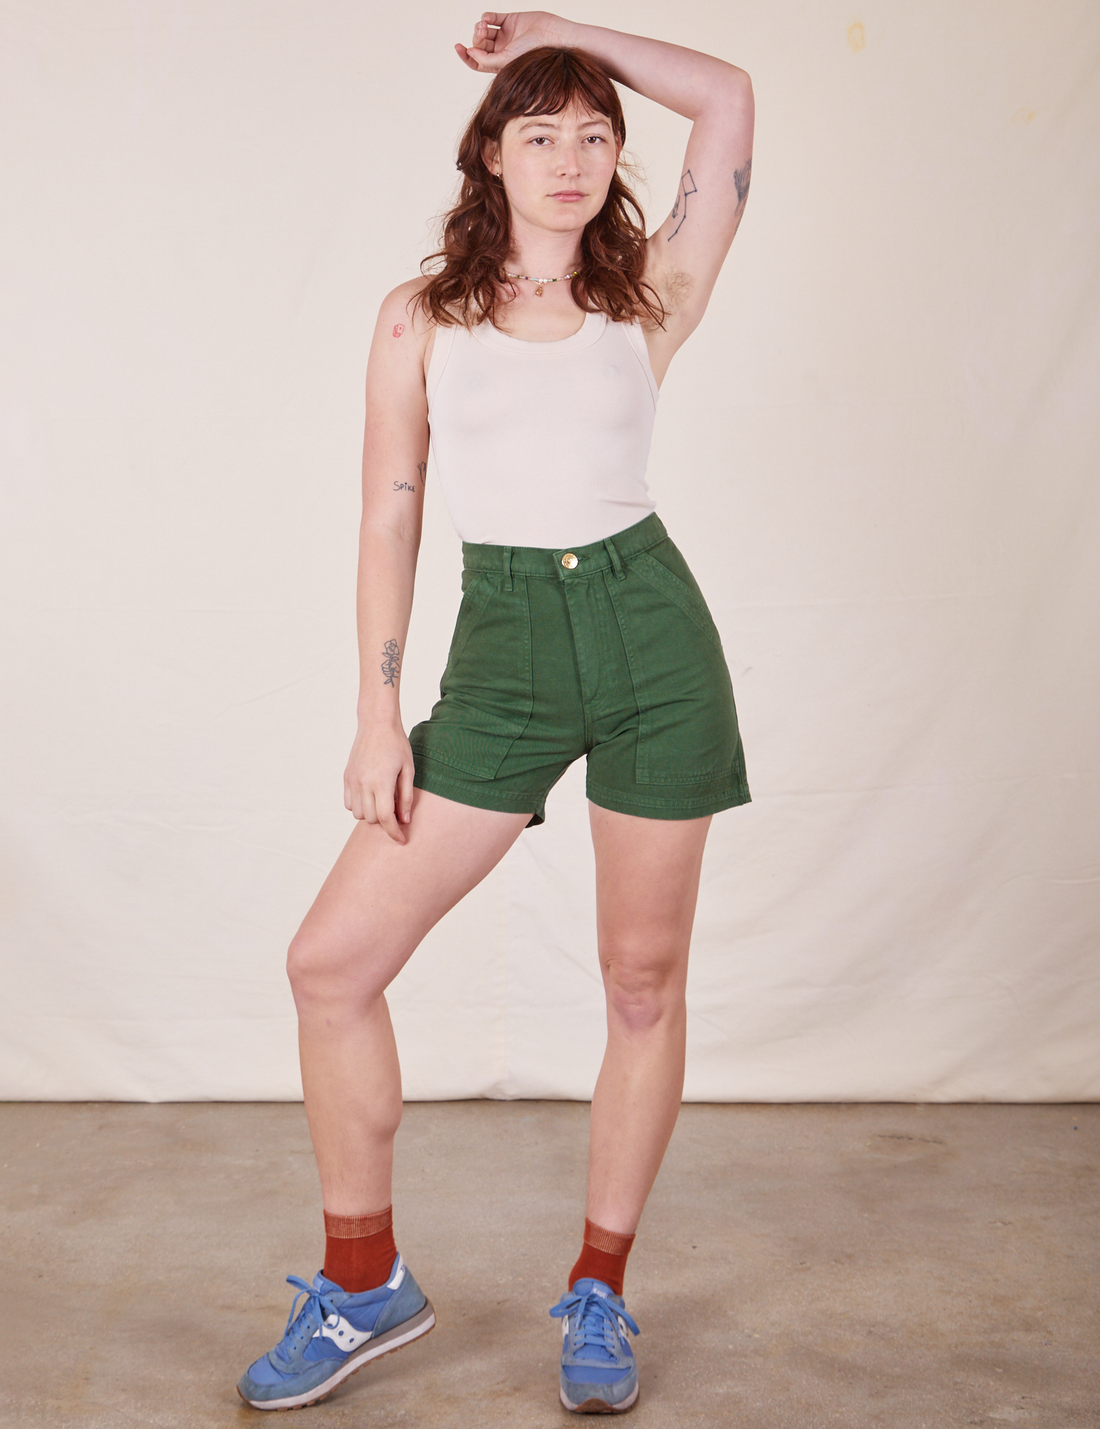 Alex is 5'8" and wearing XS Classic Work Shorts in Dark Emerald Green paired with vintage off-white Tank Top